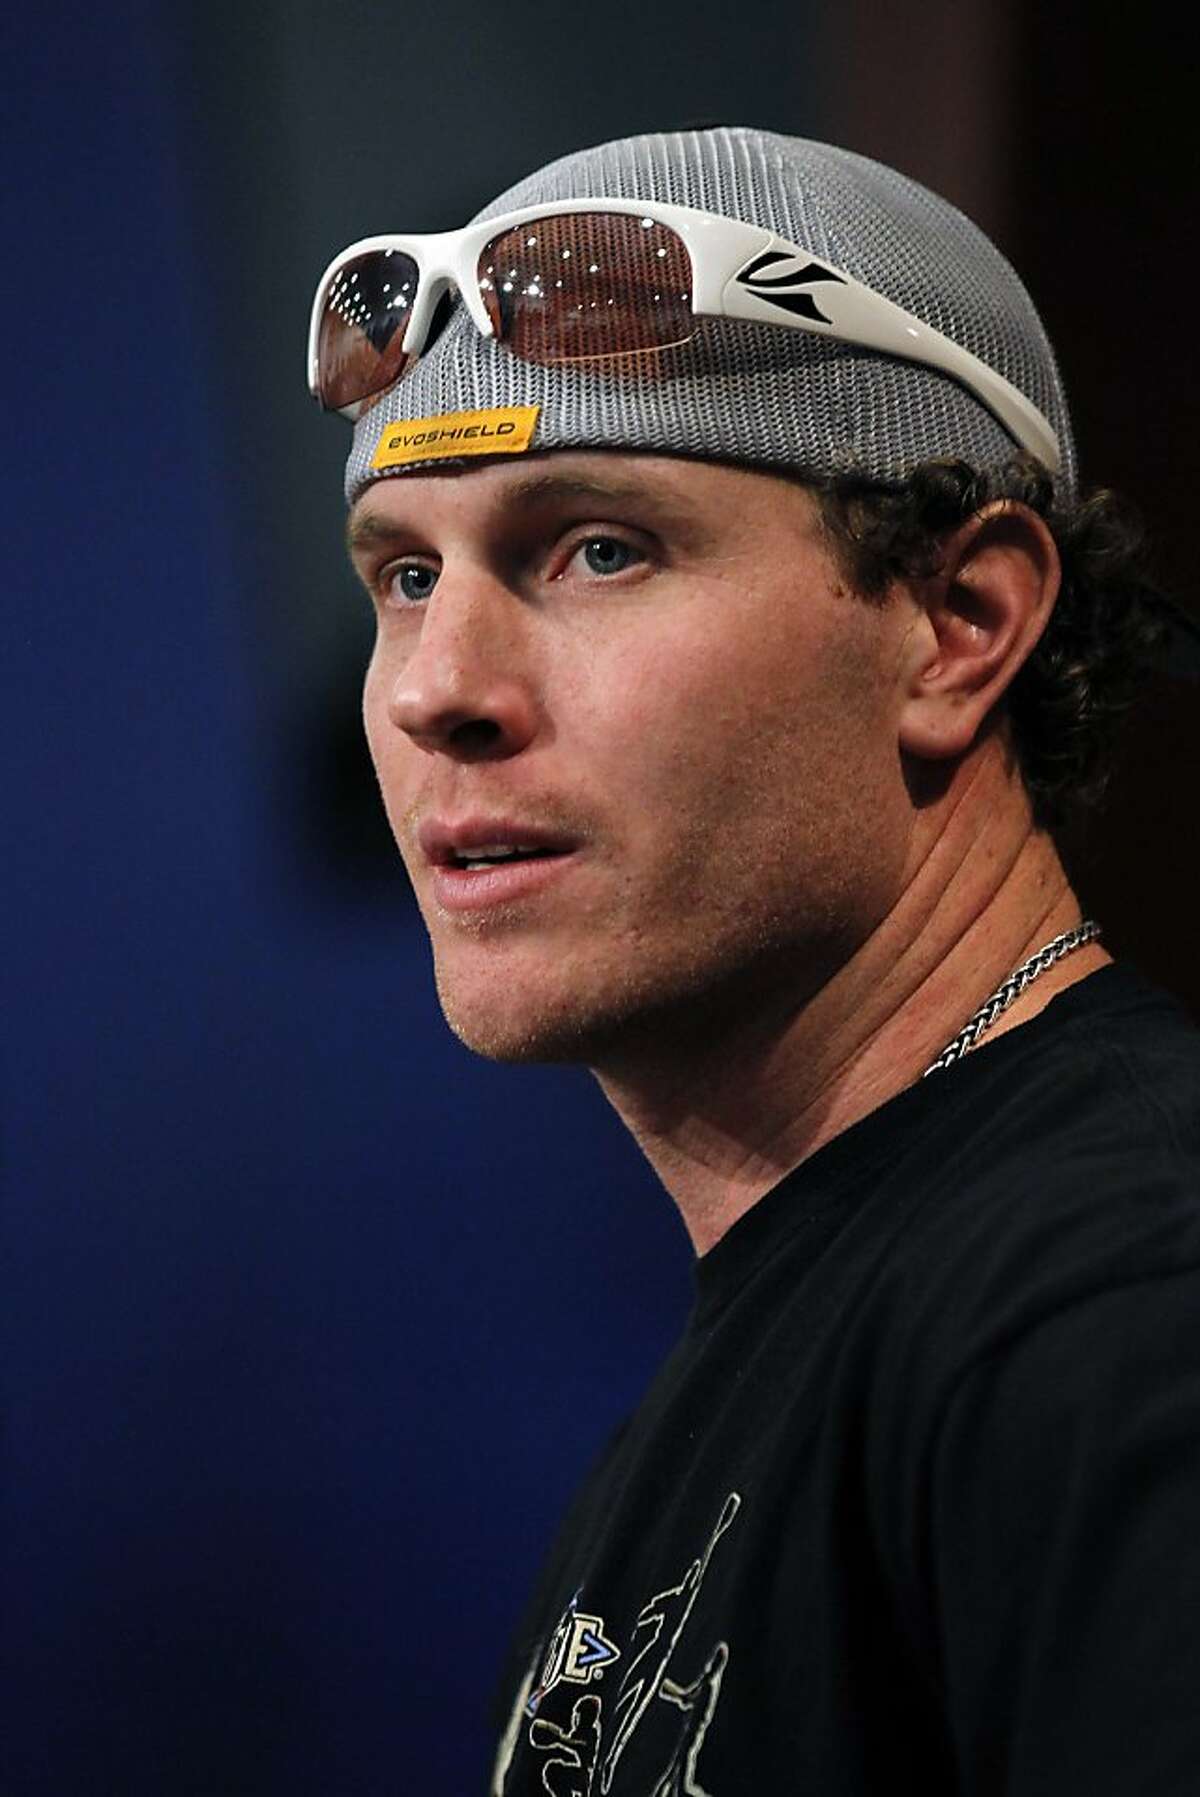 ARLINGTON, TX - FEBRUARY 3: Josh Hamilton of the Texas Rangers holds a press conference at the Rangers Ballpark in Arlington on February 3, 2012 in Arlington, Texas. Hamilton admitted to drinking alcohol earlier in the week. (Photo by Layne Murdoch/Getty Images)